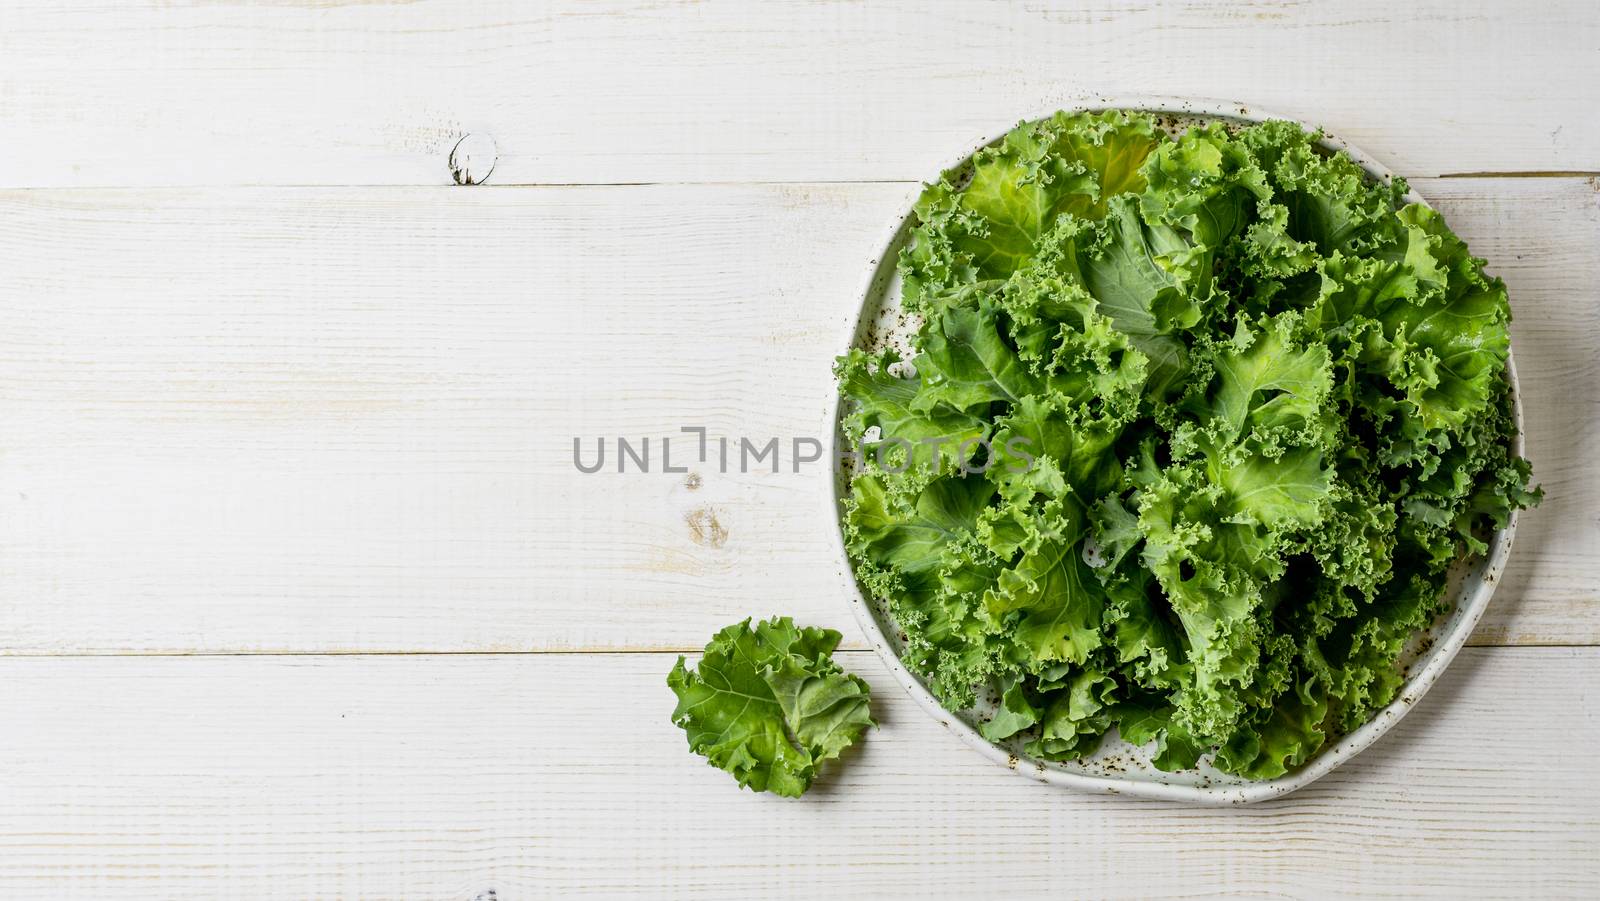 Kale close up. Green vegetable leaves, top view on white craft plate over white wooden tabletop. Healthy eating, vegetarian food,dieting concept. Top view or flat lay. Copy space. Health kale benefits